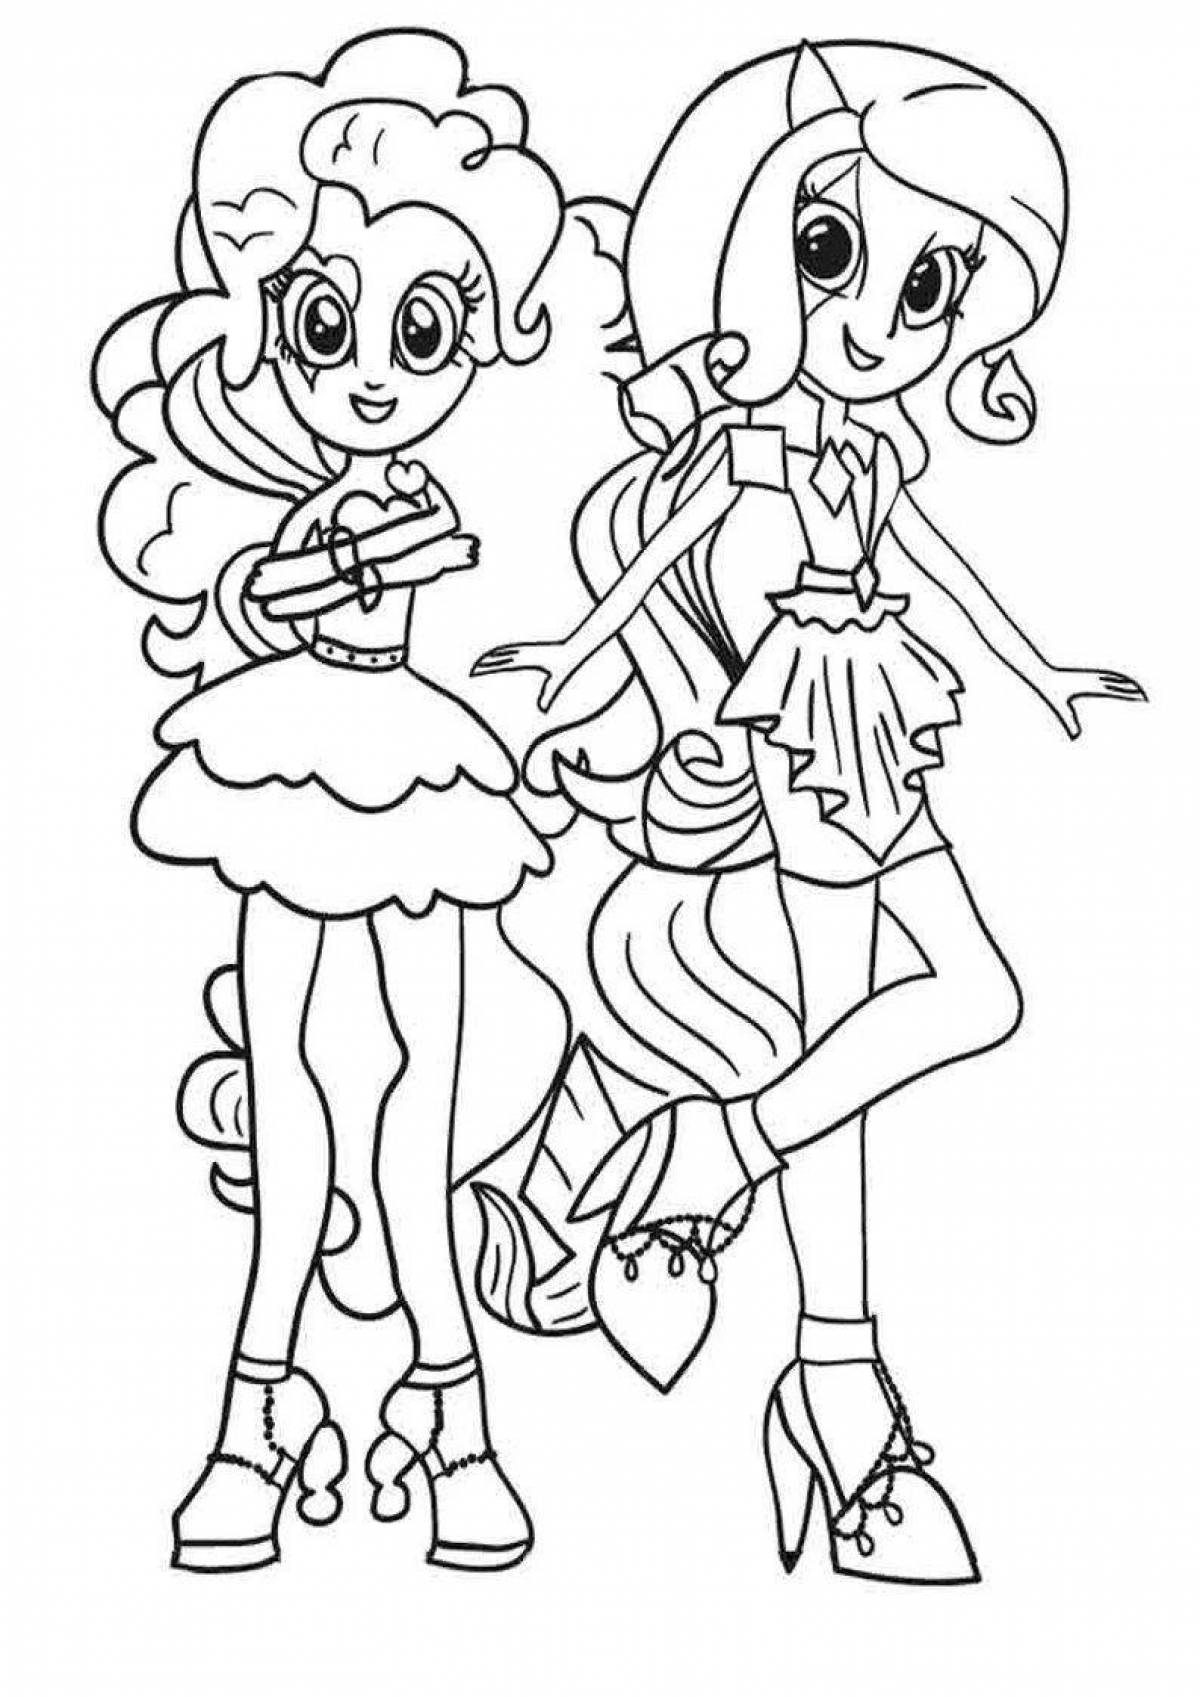 Animated Pinkie Pie Equestria Girls Coloring Page